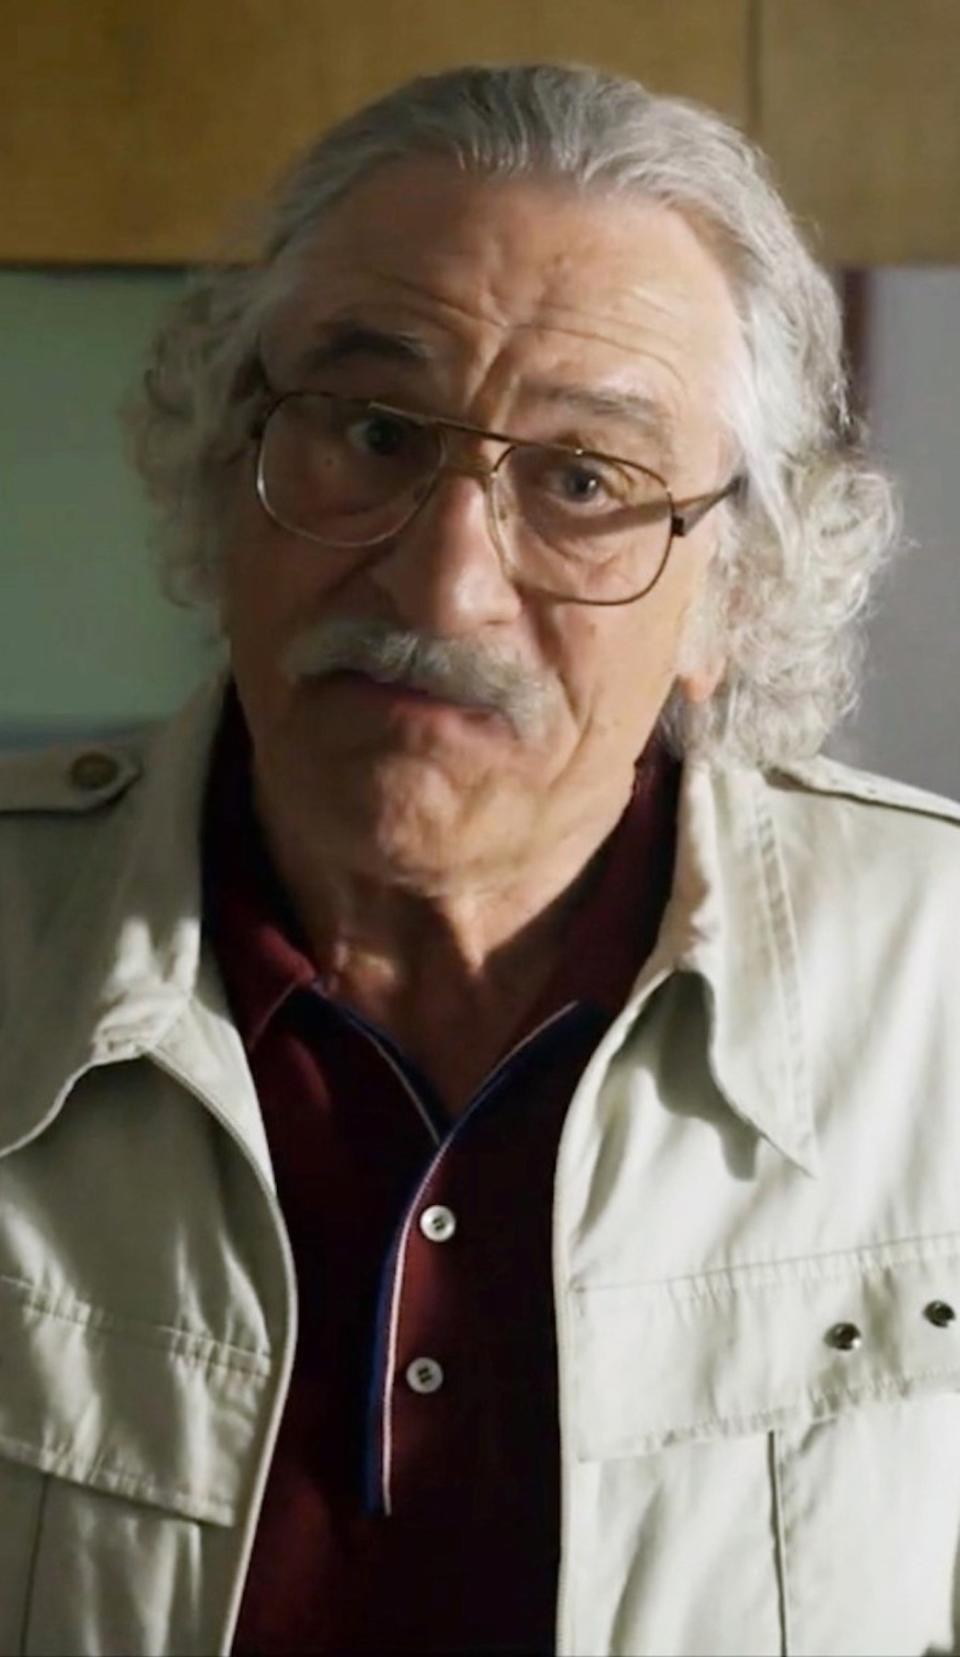 Robert De Niro with long grey hair, a grey beard, and over-sized glasses